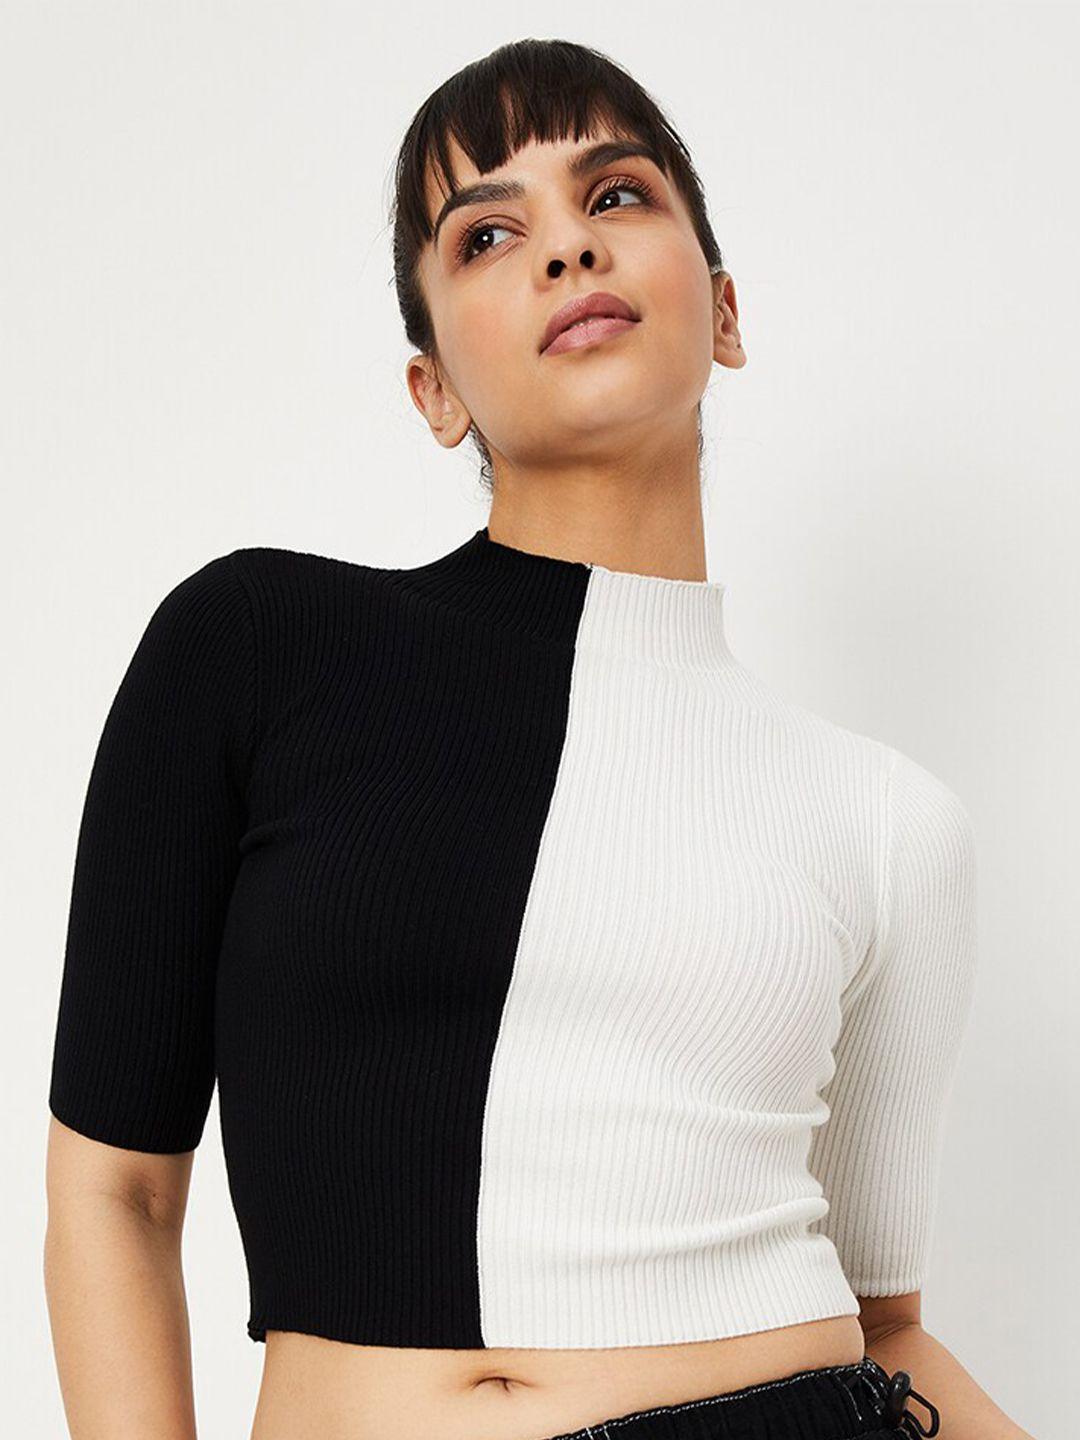 max colourblocked high neck monochrome fitted crop top